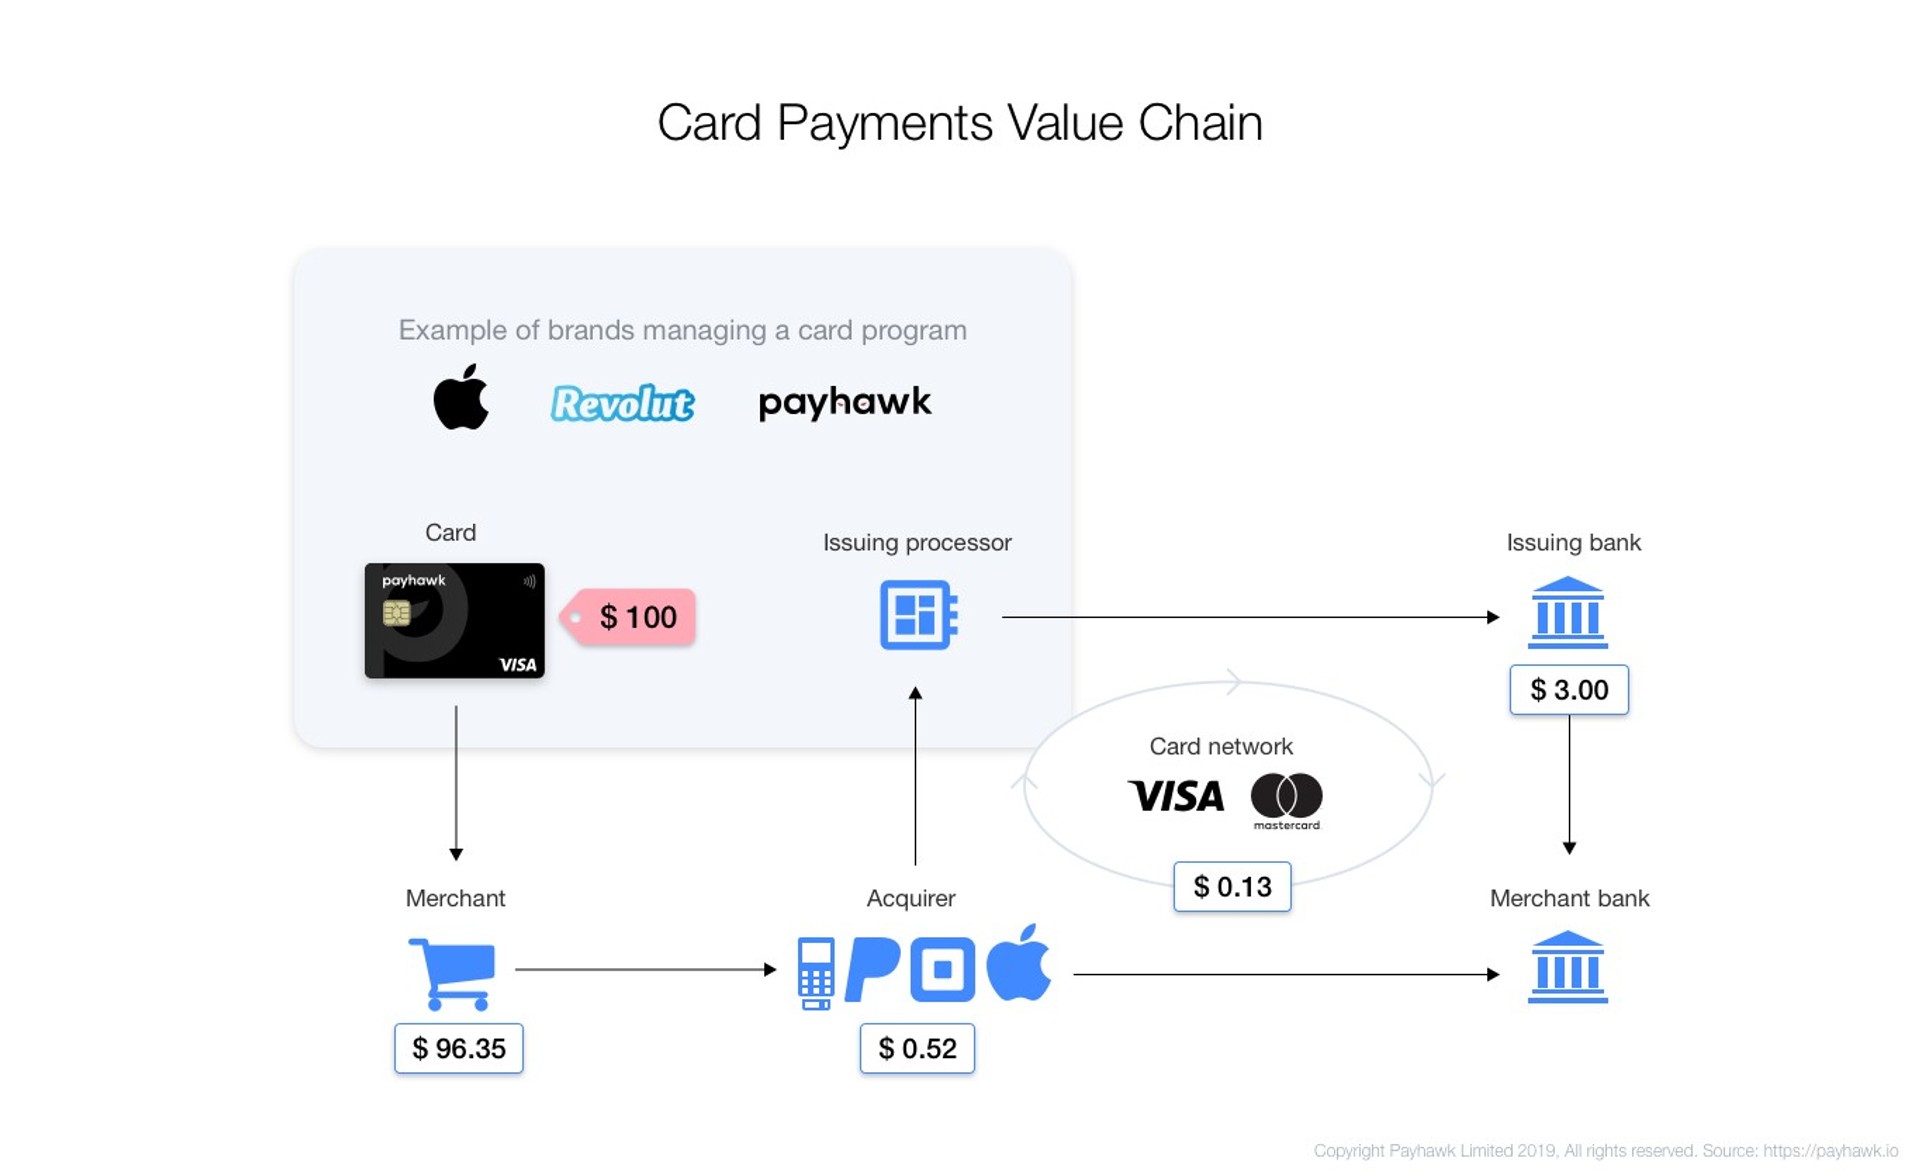 Card Payments value chain explained